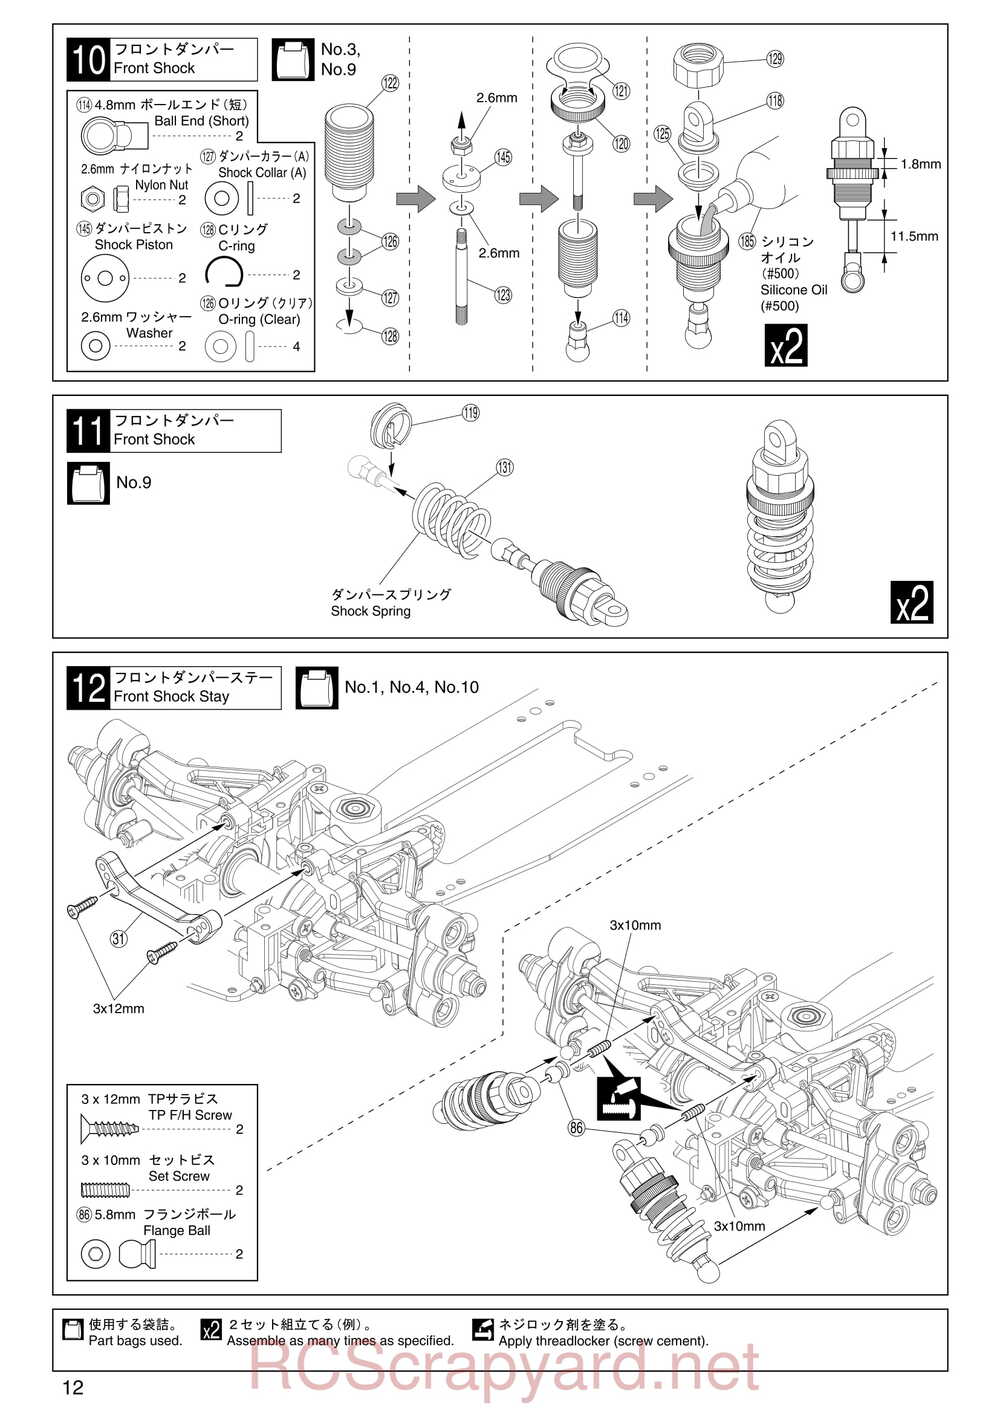 Kyosho - 31257 - V-One RRR Rubber - Manual - Page 12